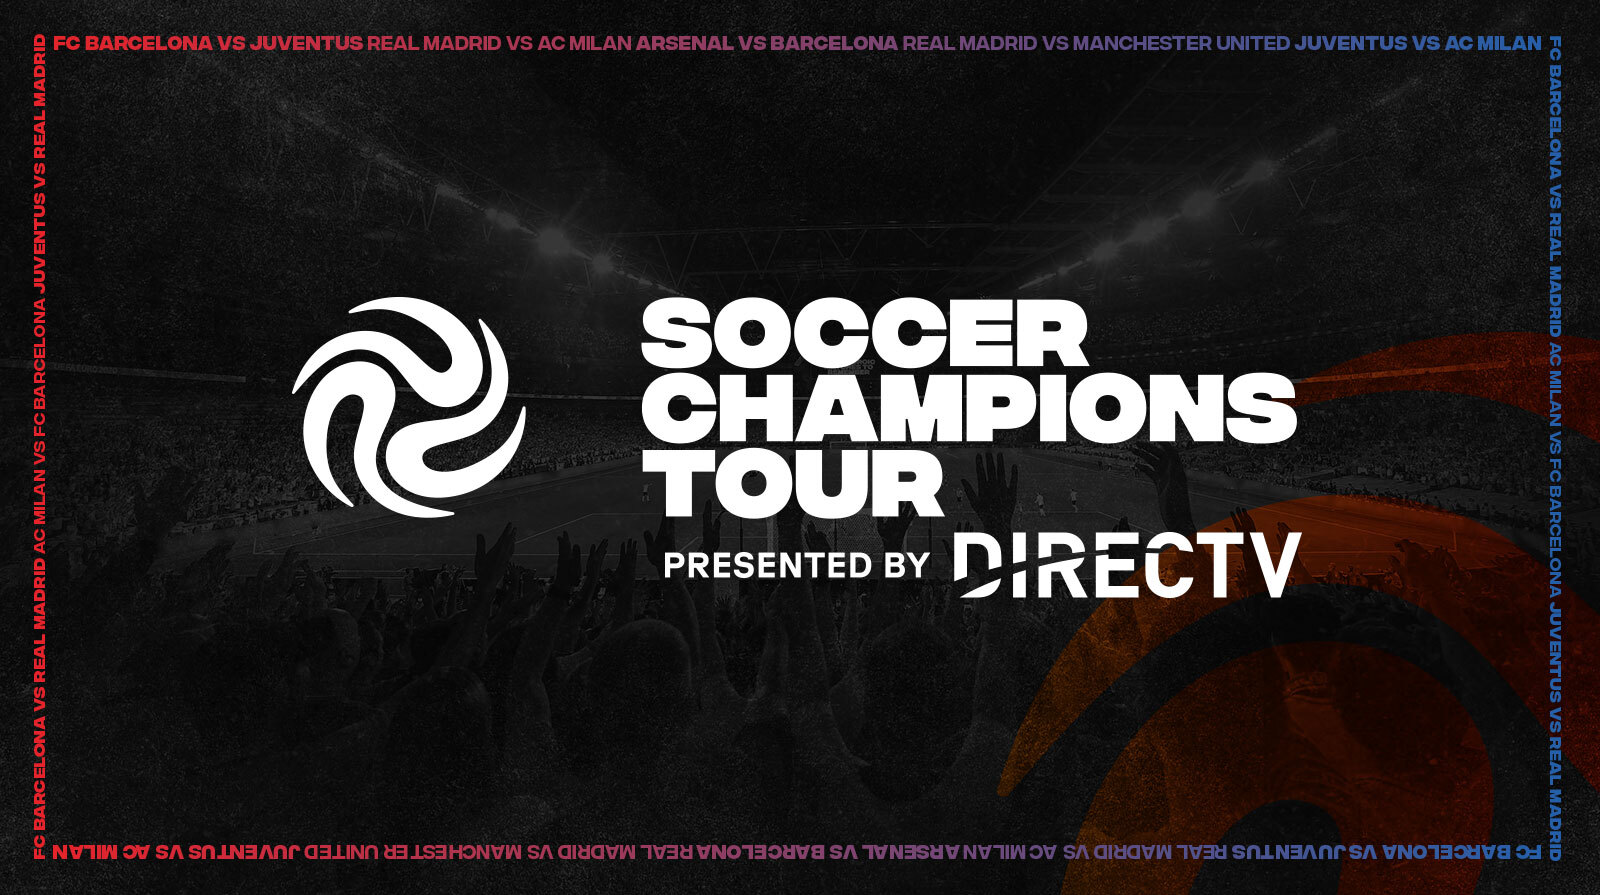 Soccer Champions Tour Announces New U.S. Summer Series Featuring Real Madrid CF, FC Barcelona, Juventus, AC Milan, Arsenal, and Manchester United